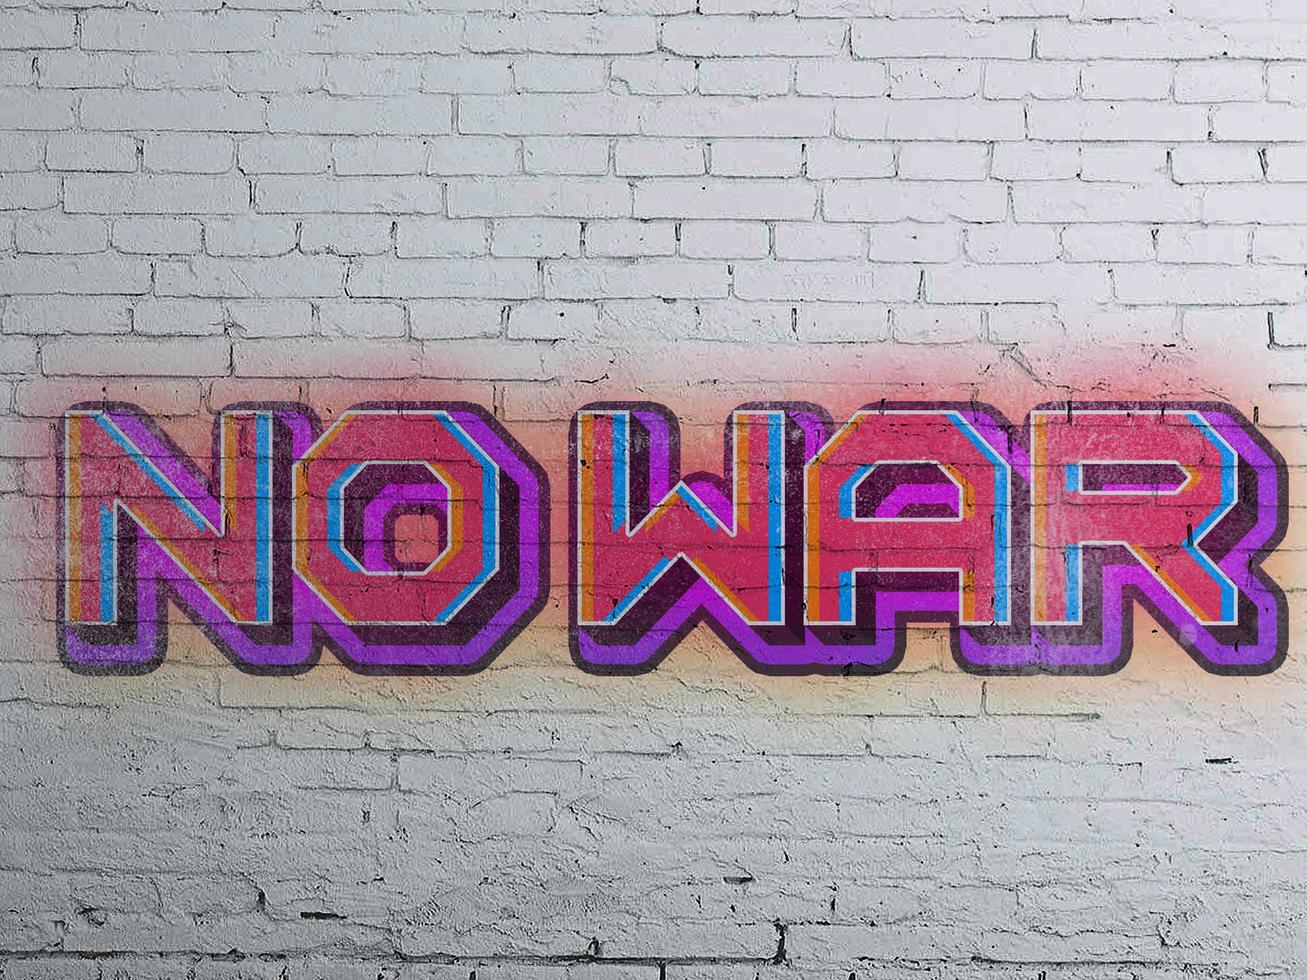 No War concept image painted on a brick wall photo